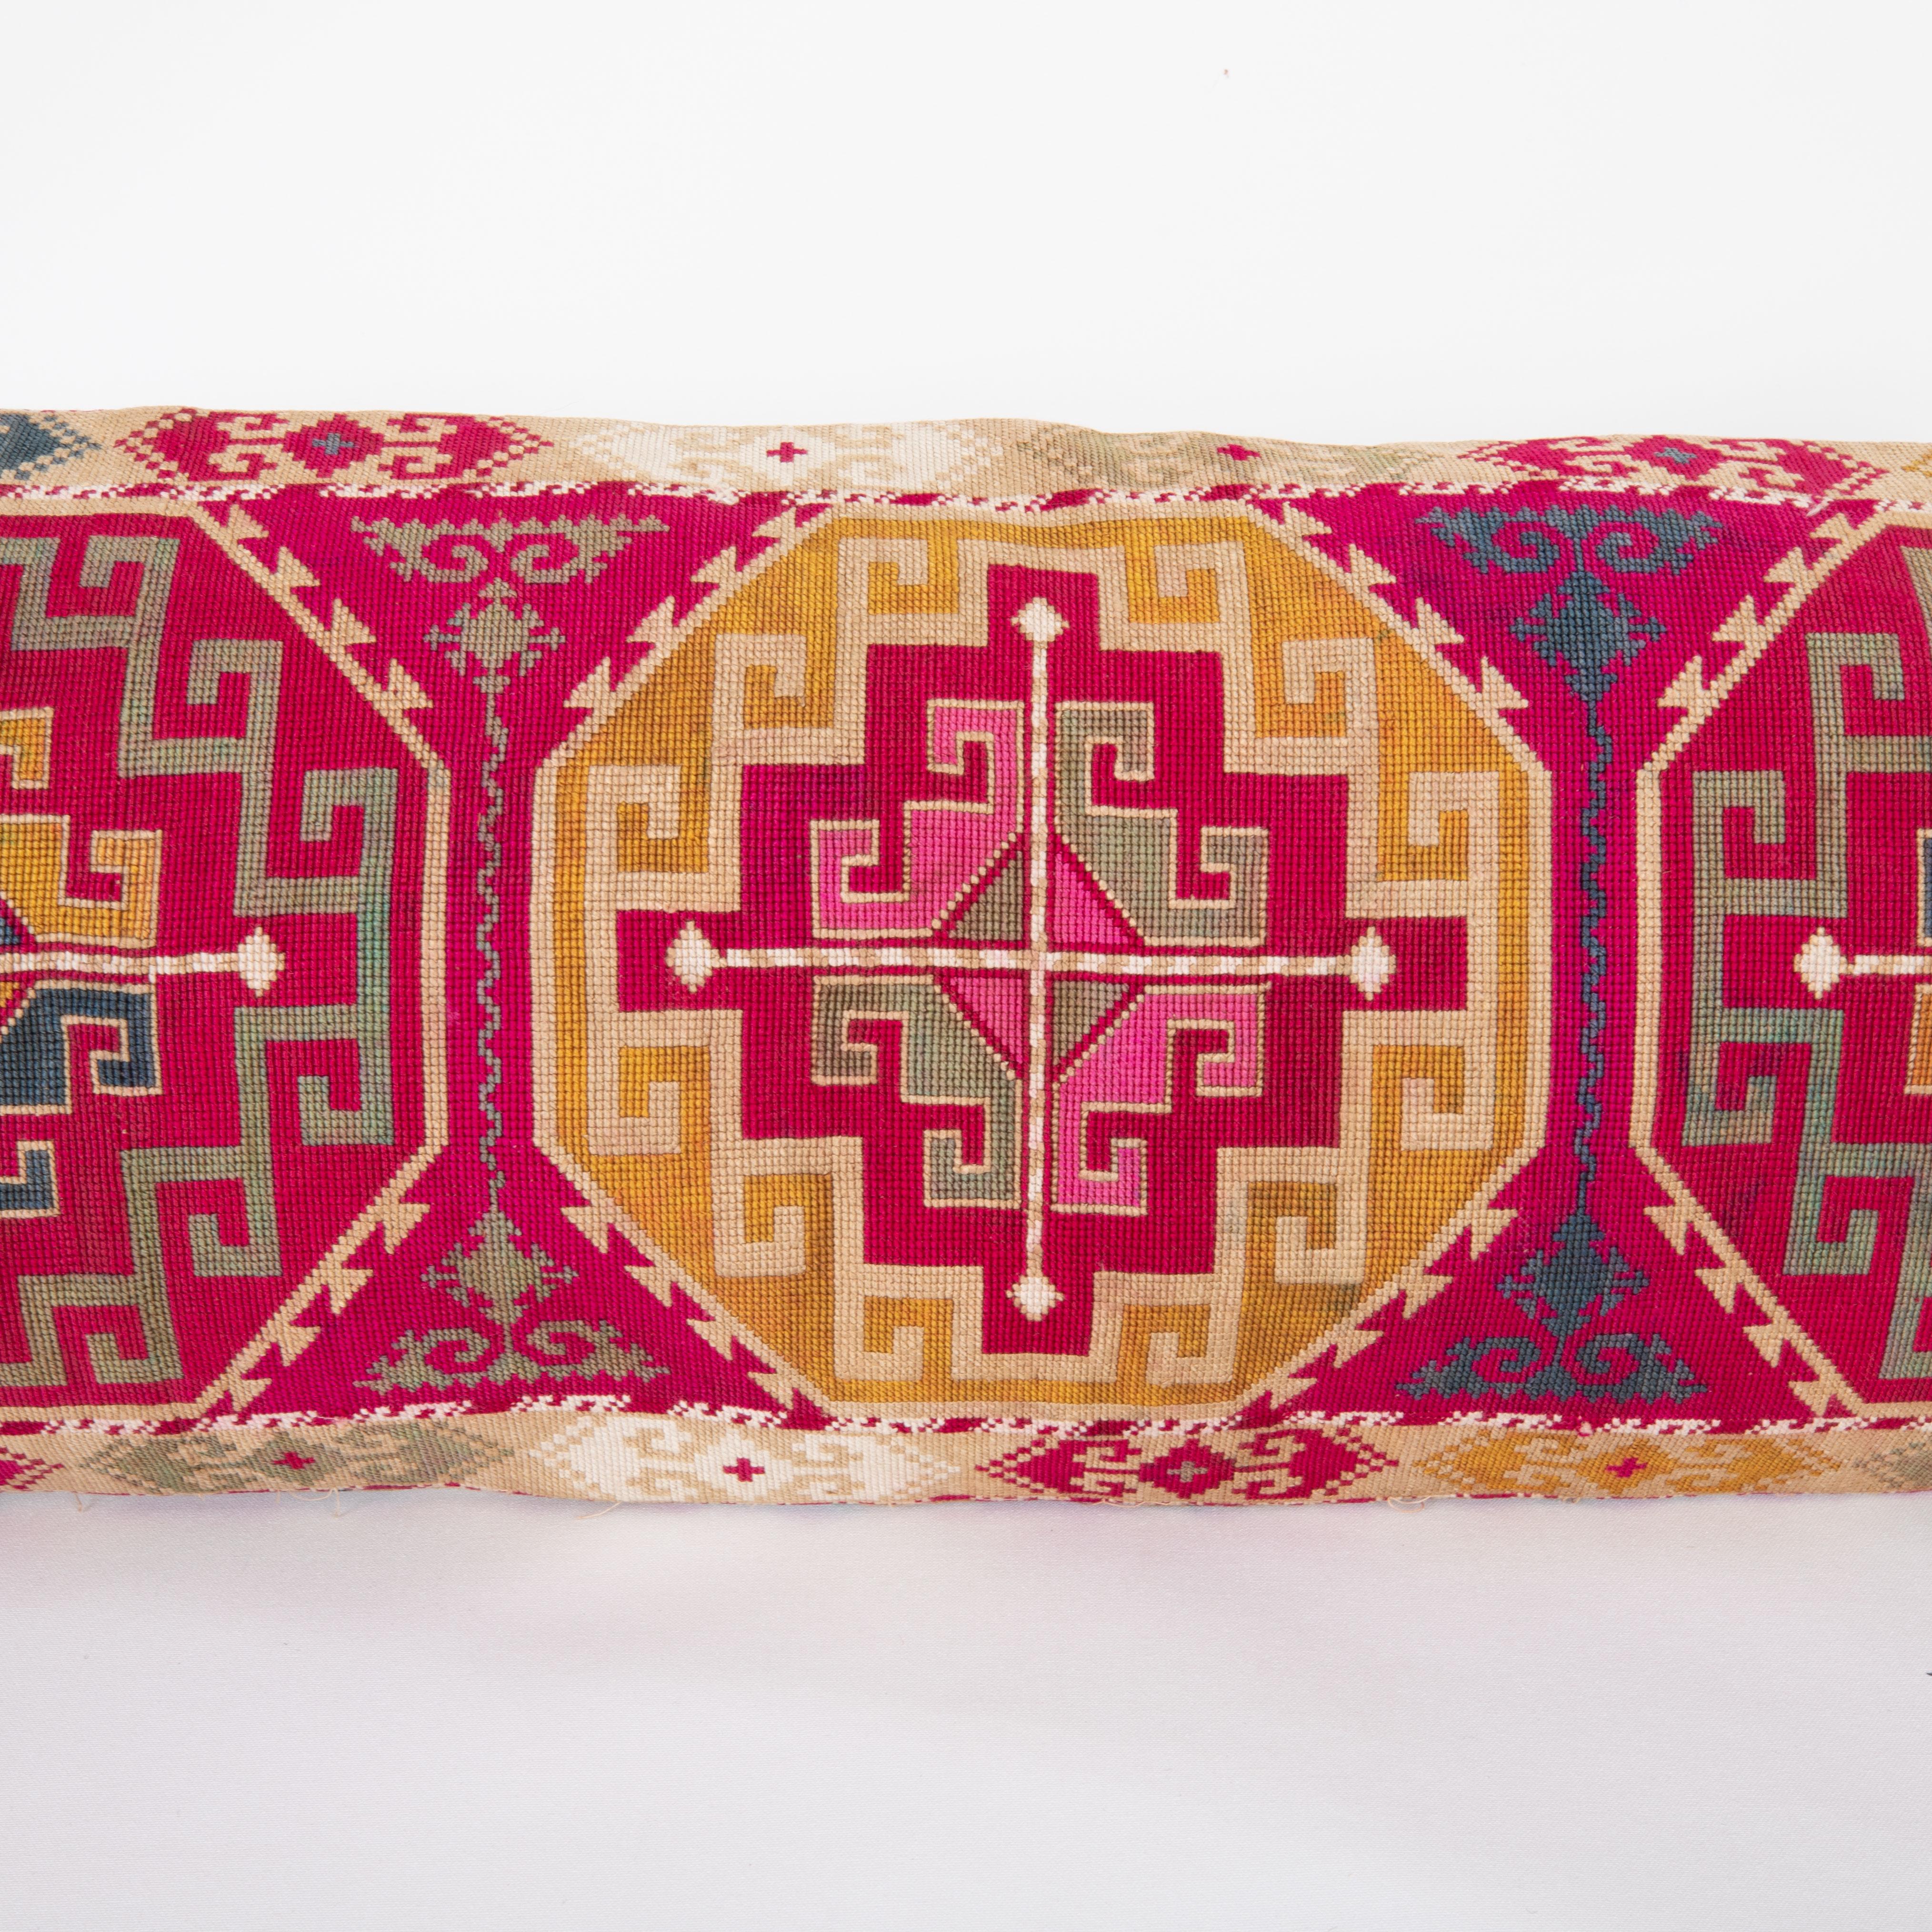 Embroidered Pillow Cover, Made from a 1970s/80s silk mafrash ( storage bag ) Panel For Sale